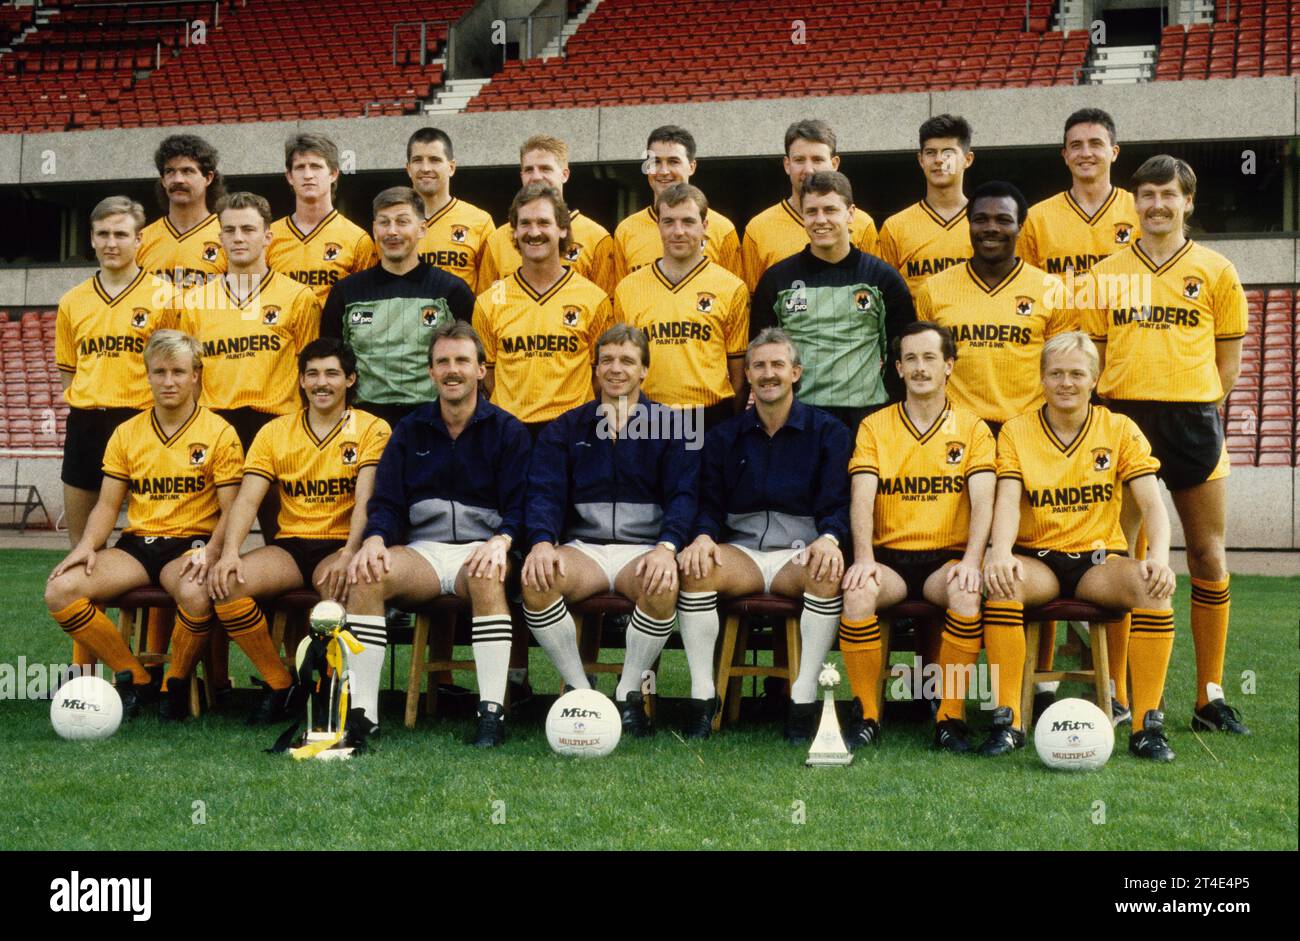 Wolves team 1988.Back row Jackie Gallagher, Andy Mutch, Steve Bull, Phil Robinson, Rob Kelly, Robbie Dennison, Tom Bennett, Phil Chard.  Middle Mark Venus, Nicky Clarke, Mark Kendall,  Alistair Robertson, Chris Brindley, Vince Bartram, Floyd Streete, Gary Bellamy. Front   Andy Thompson, Paul Darby, Graham Turner, Barry Powell, Nigel Vaughan, and Keith Downing, Stock Photo